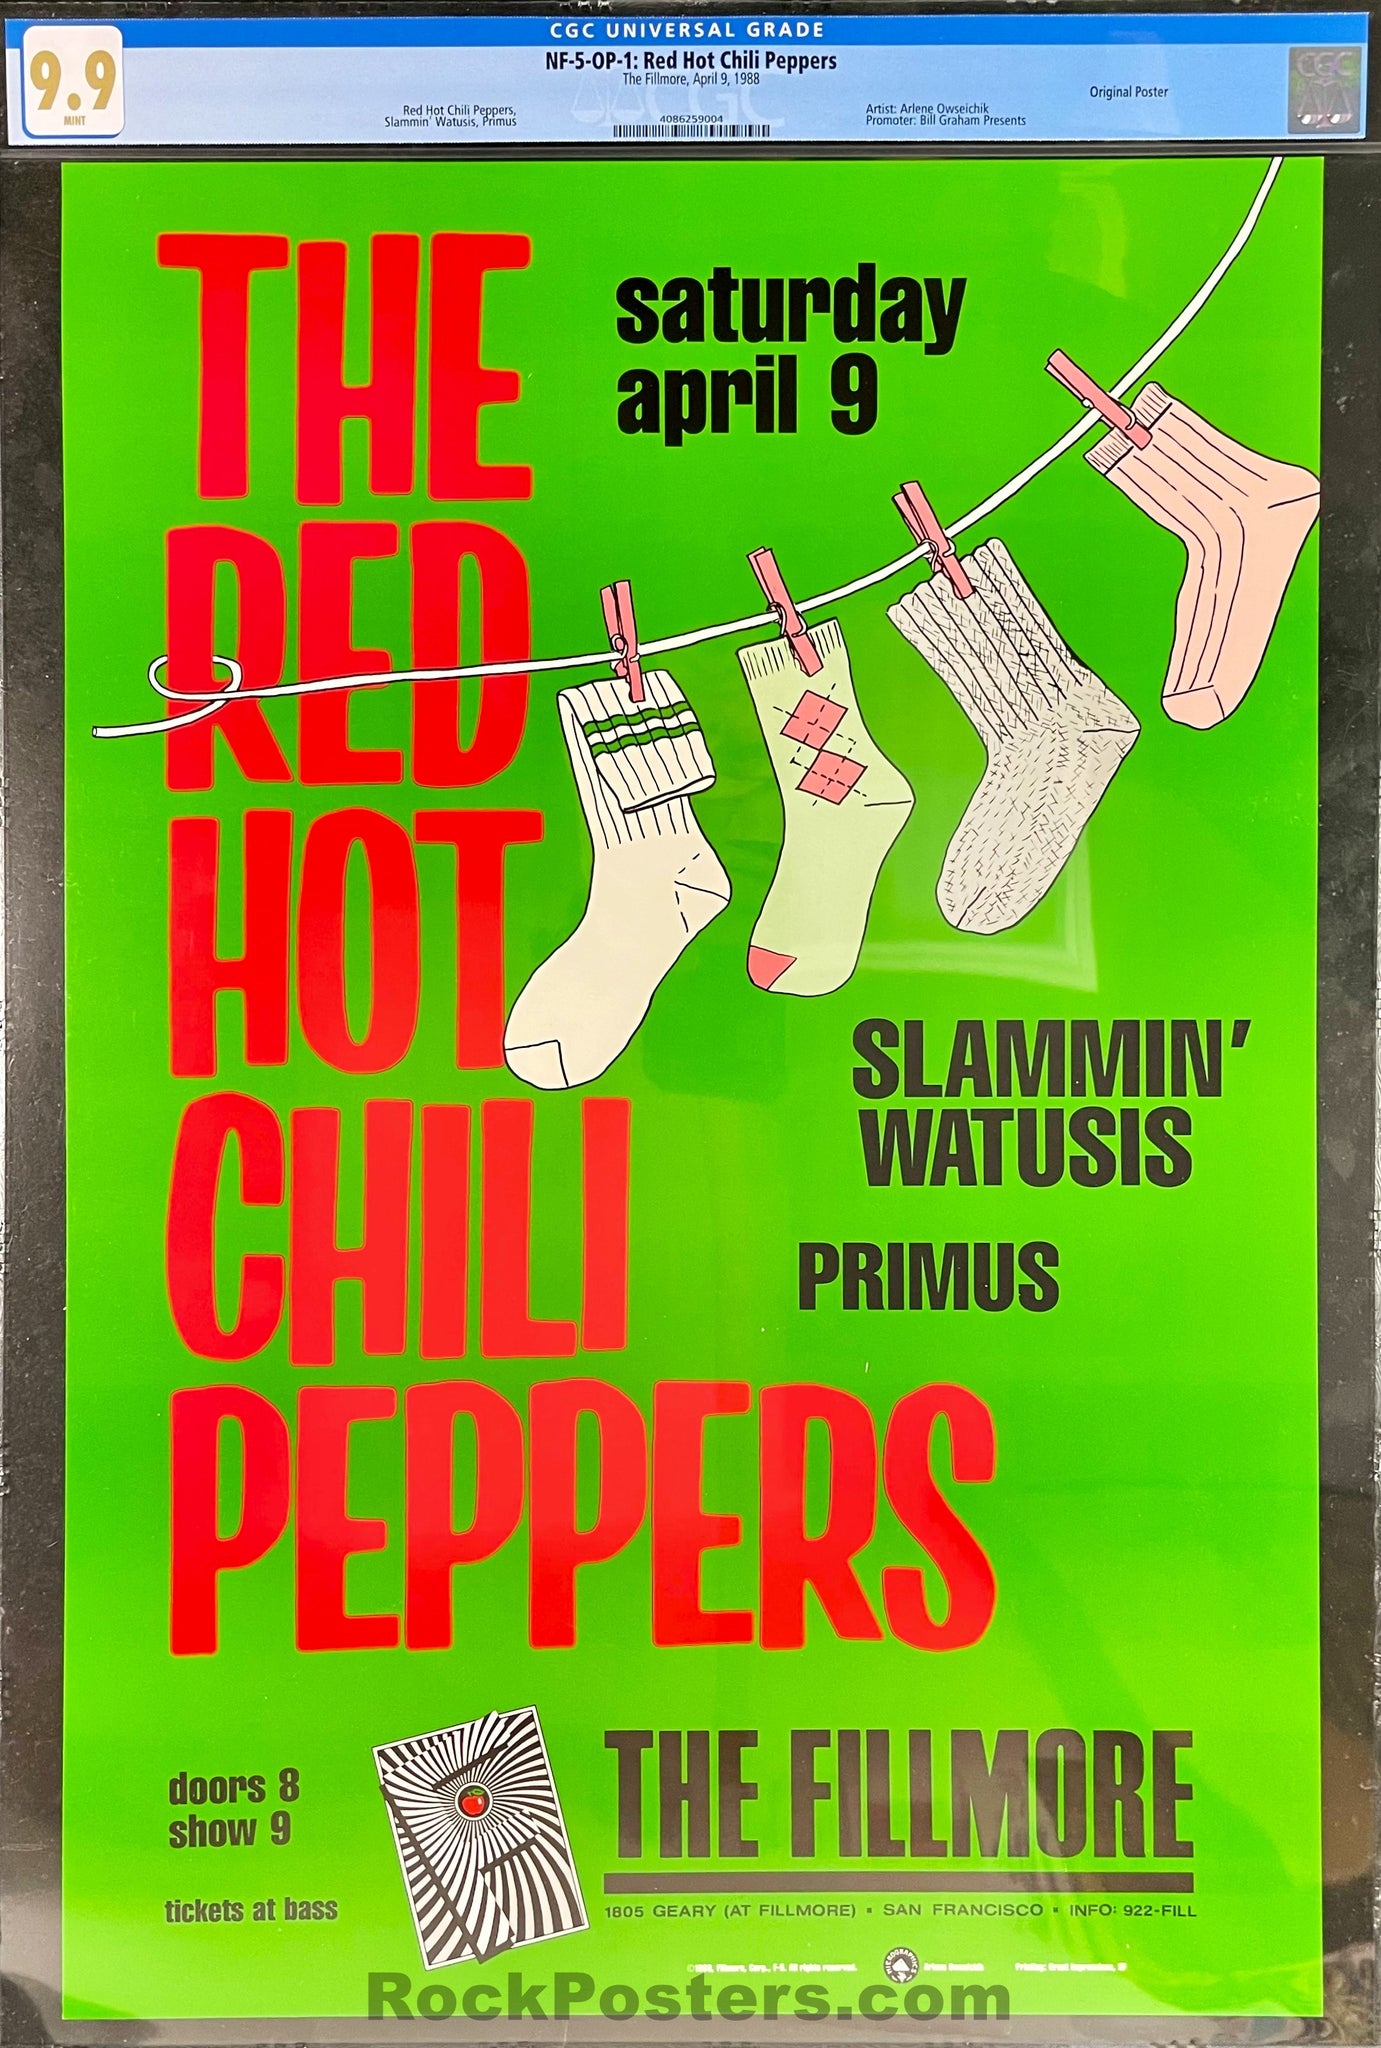 NF-5 - Red Hot Chili Peppers - 1988 Poster - The Fillmore - CGC Graded 9.9 Mint